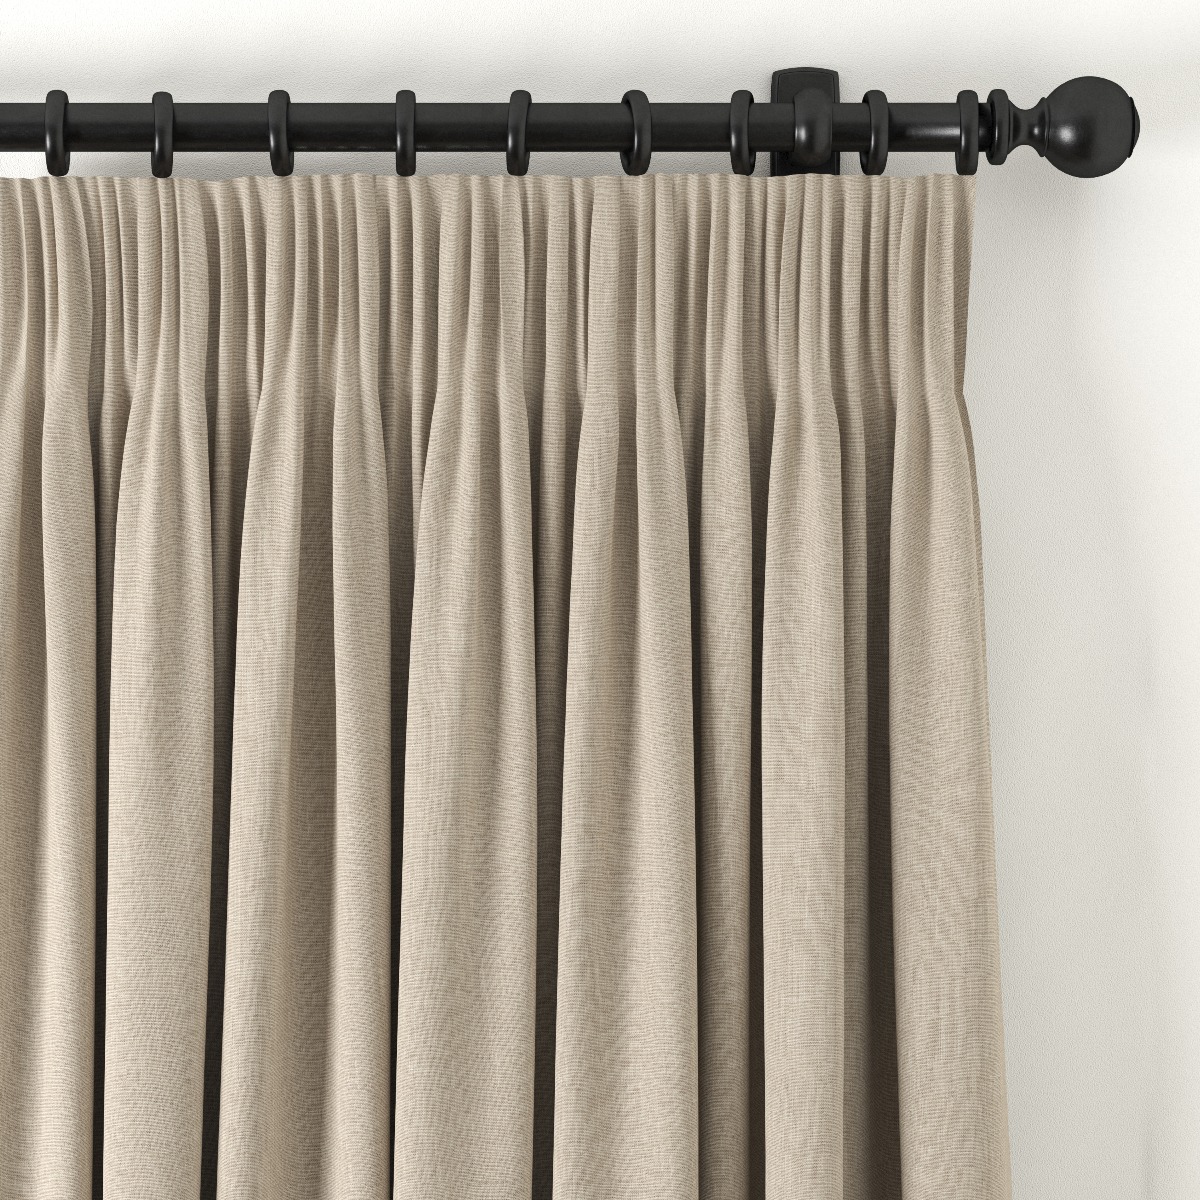 How to choose the right curtain heading | Warner House